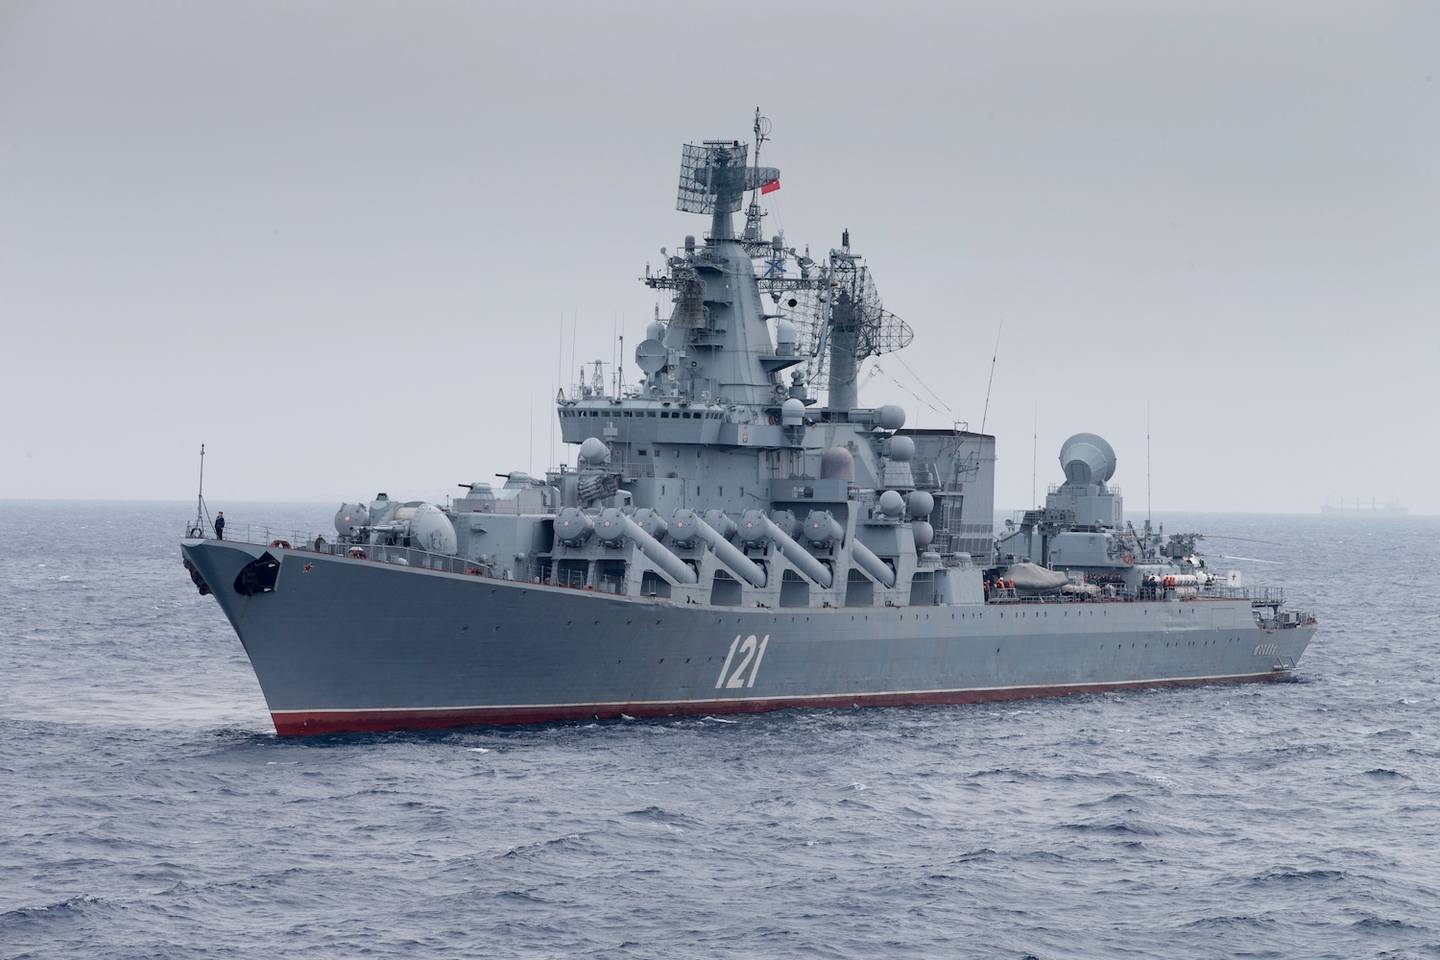 Russian missile cruiser Moskva is on patrol in the Mediterranean Sea near the Syrian coast on December 17, 2015. Photo / AP